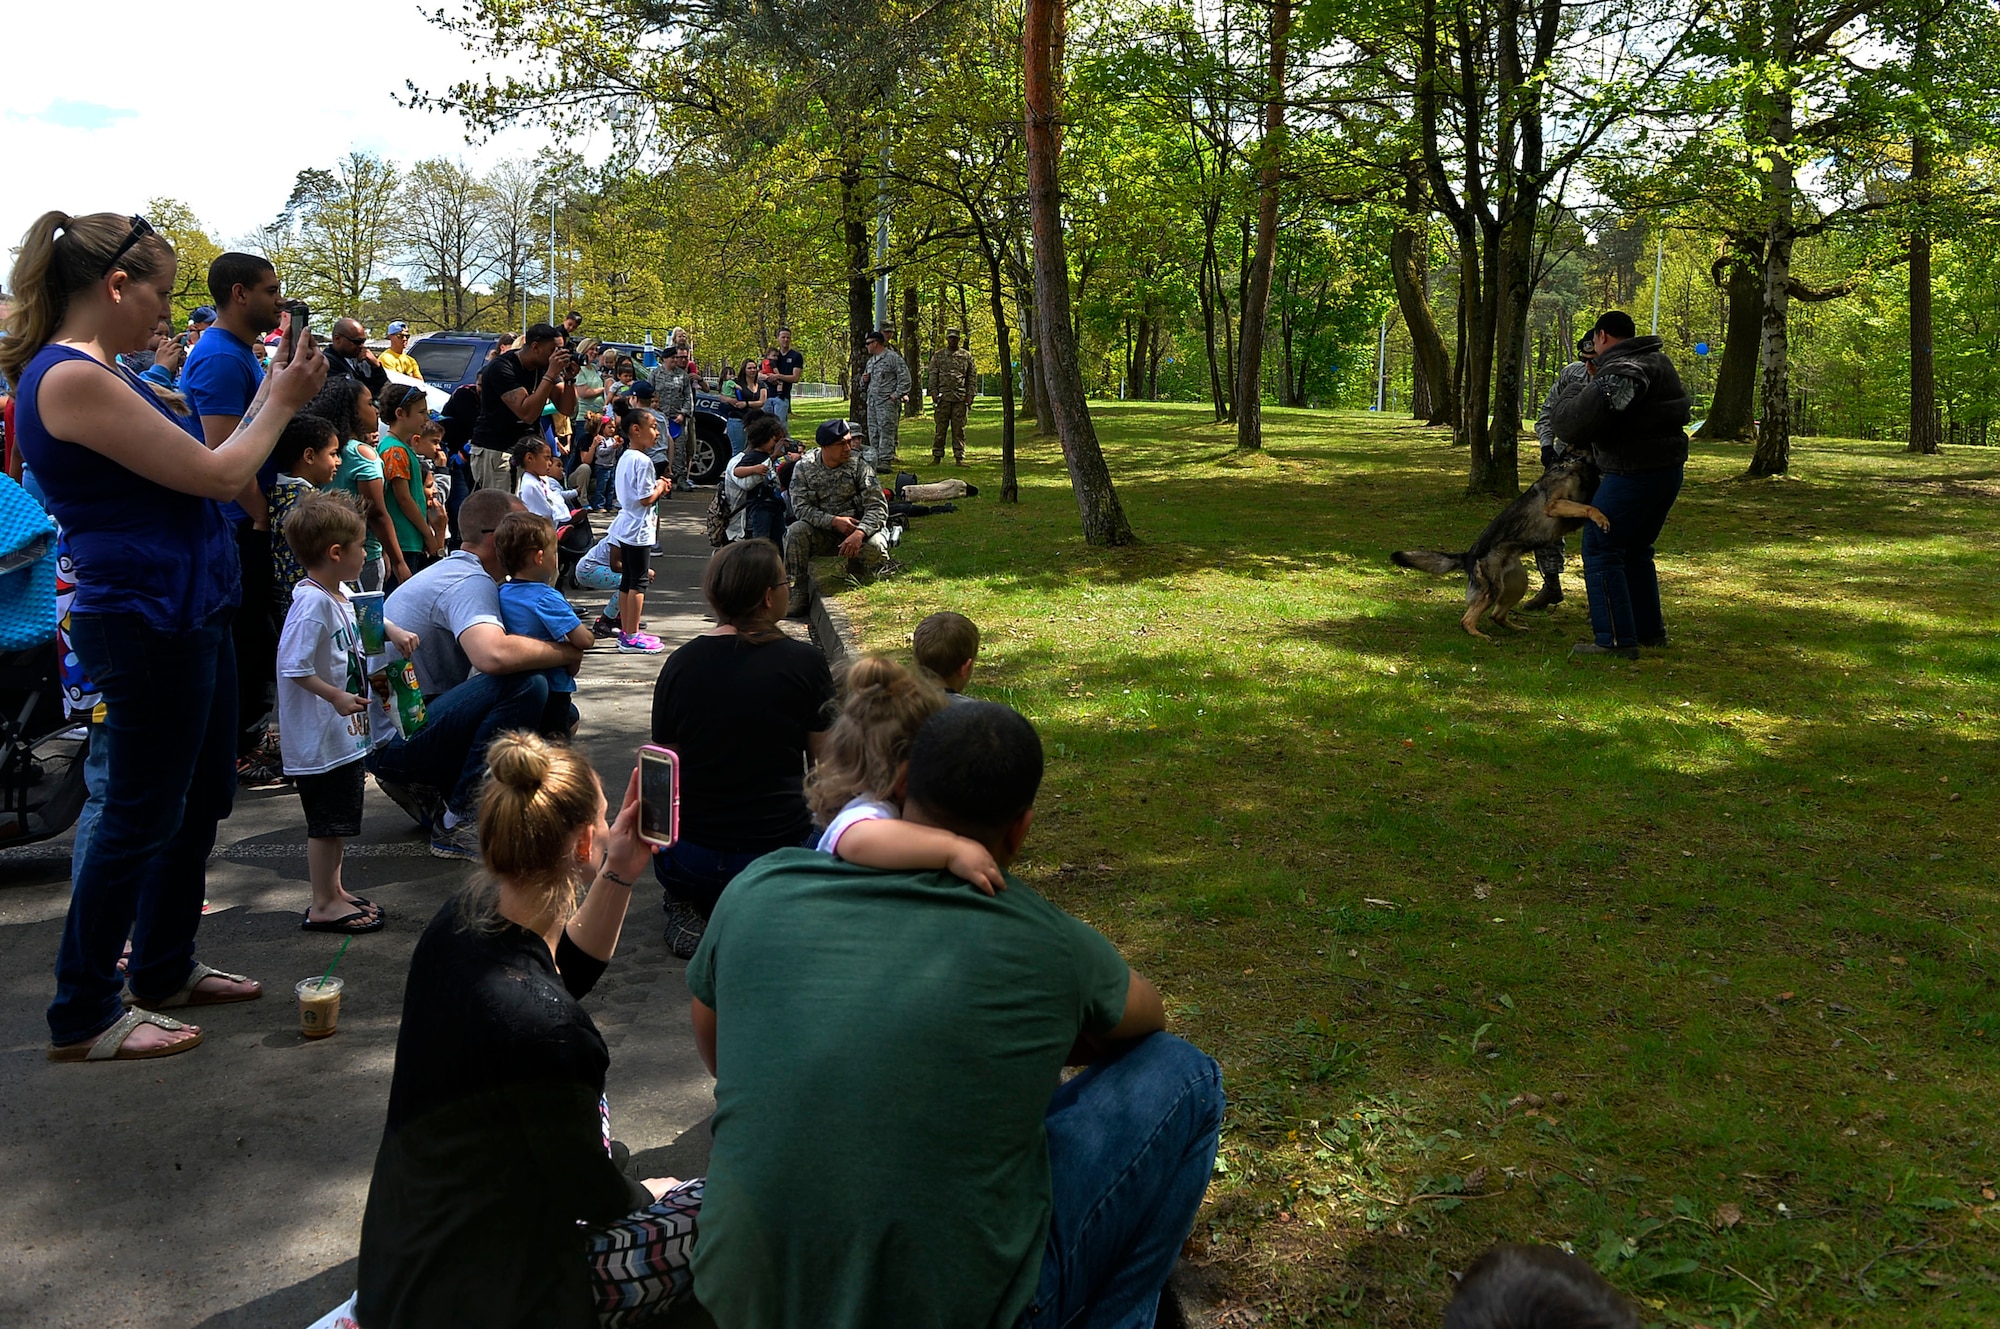 Spectators watch a K-9 demonstration on Ramstein Air Base, Germany, May 13, 2017. Ramstein hosted a family-friendly police display in order to foster trust and support within the community. (U.S. Air Force photo by Airman 1st Class Joshua Magbanua) 